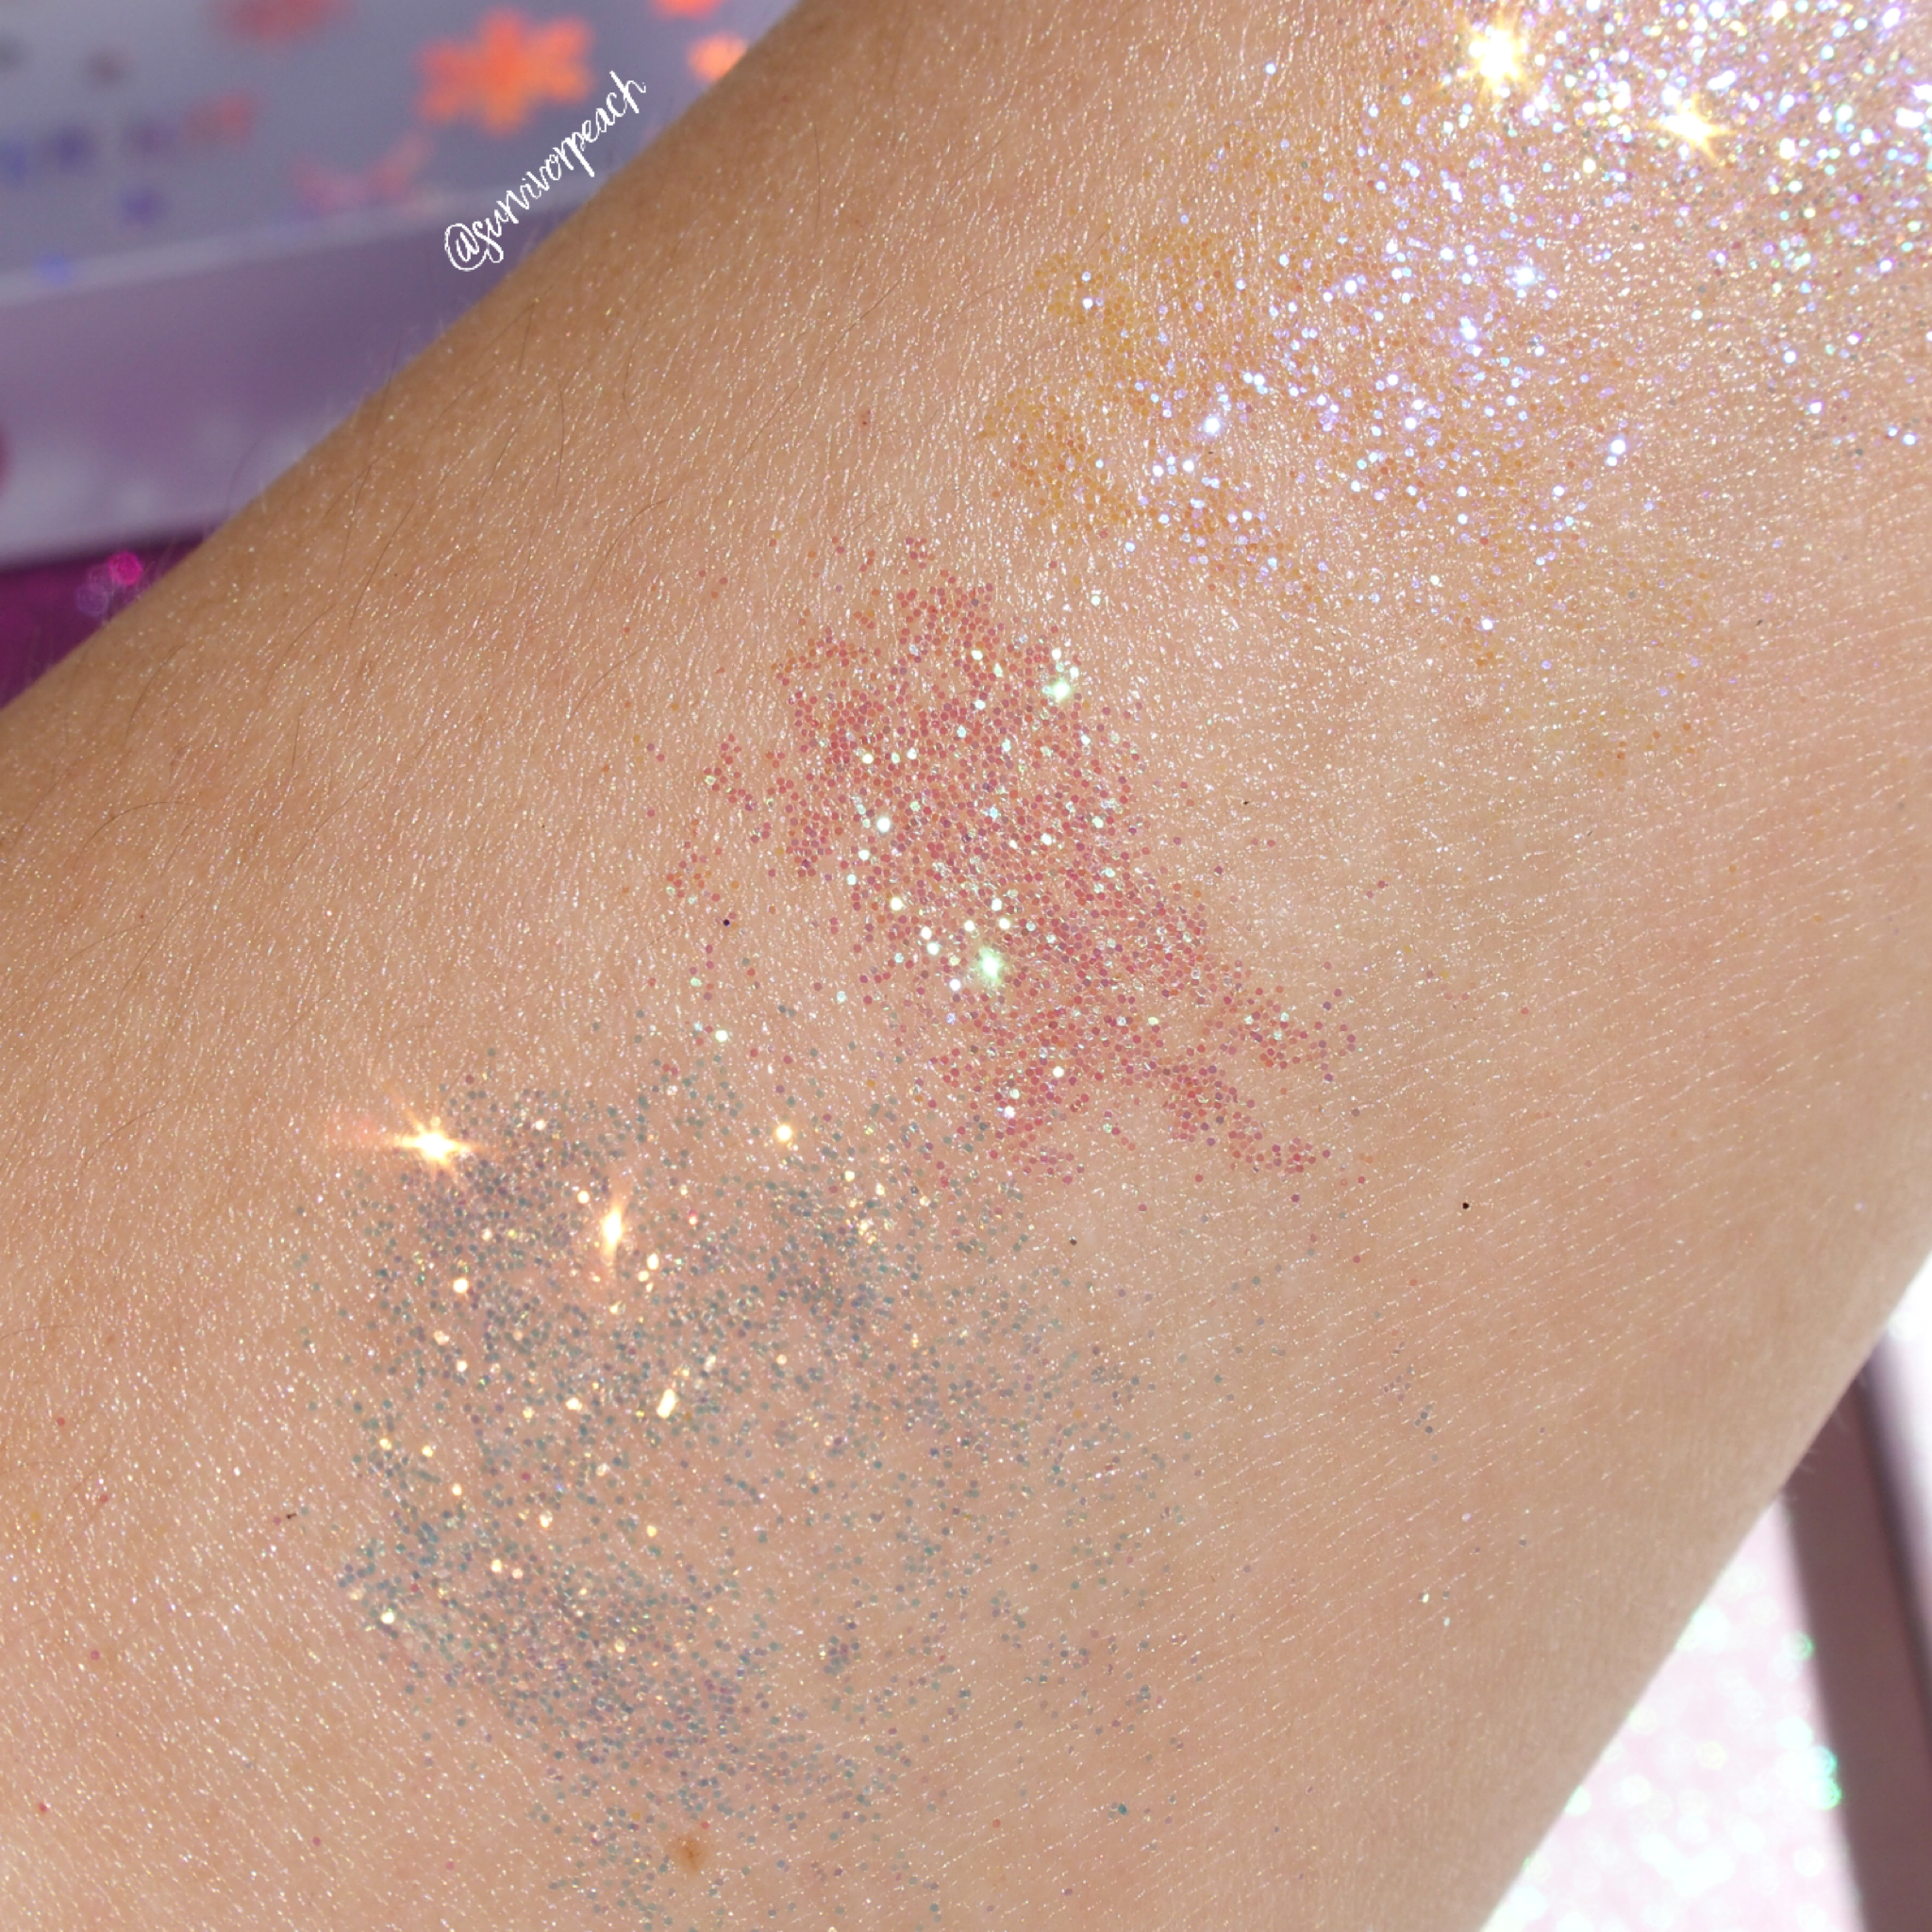 Anastasia Beverly Hills Halloween Loose Glitter Review